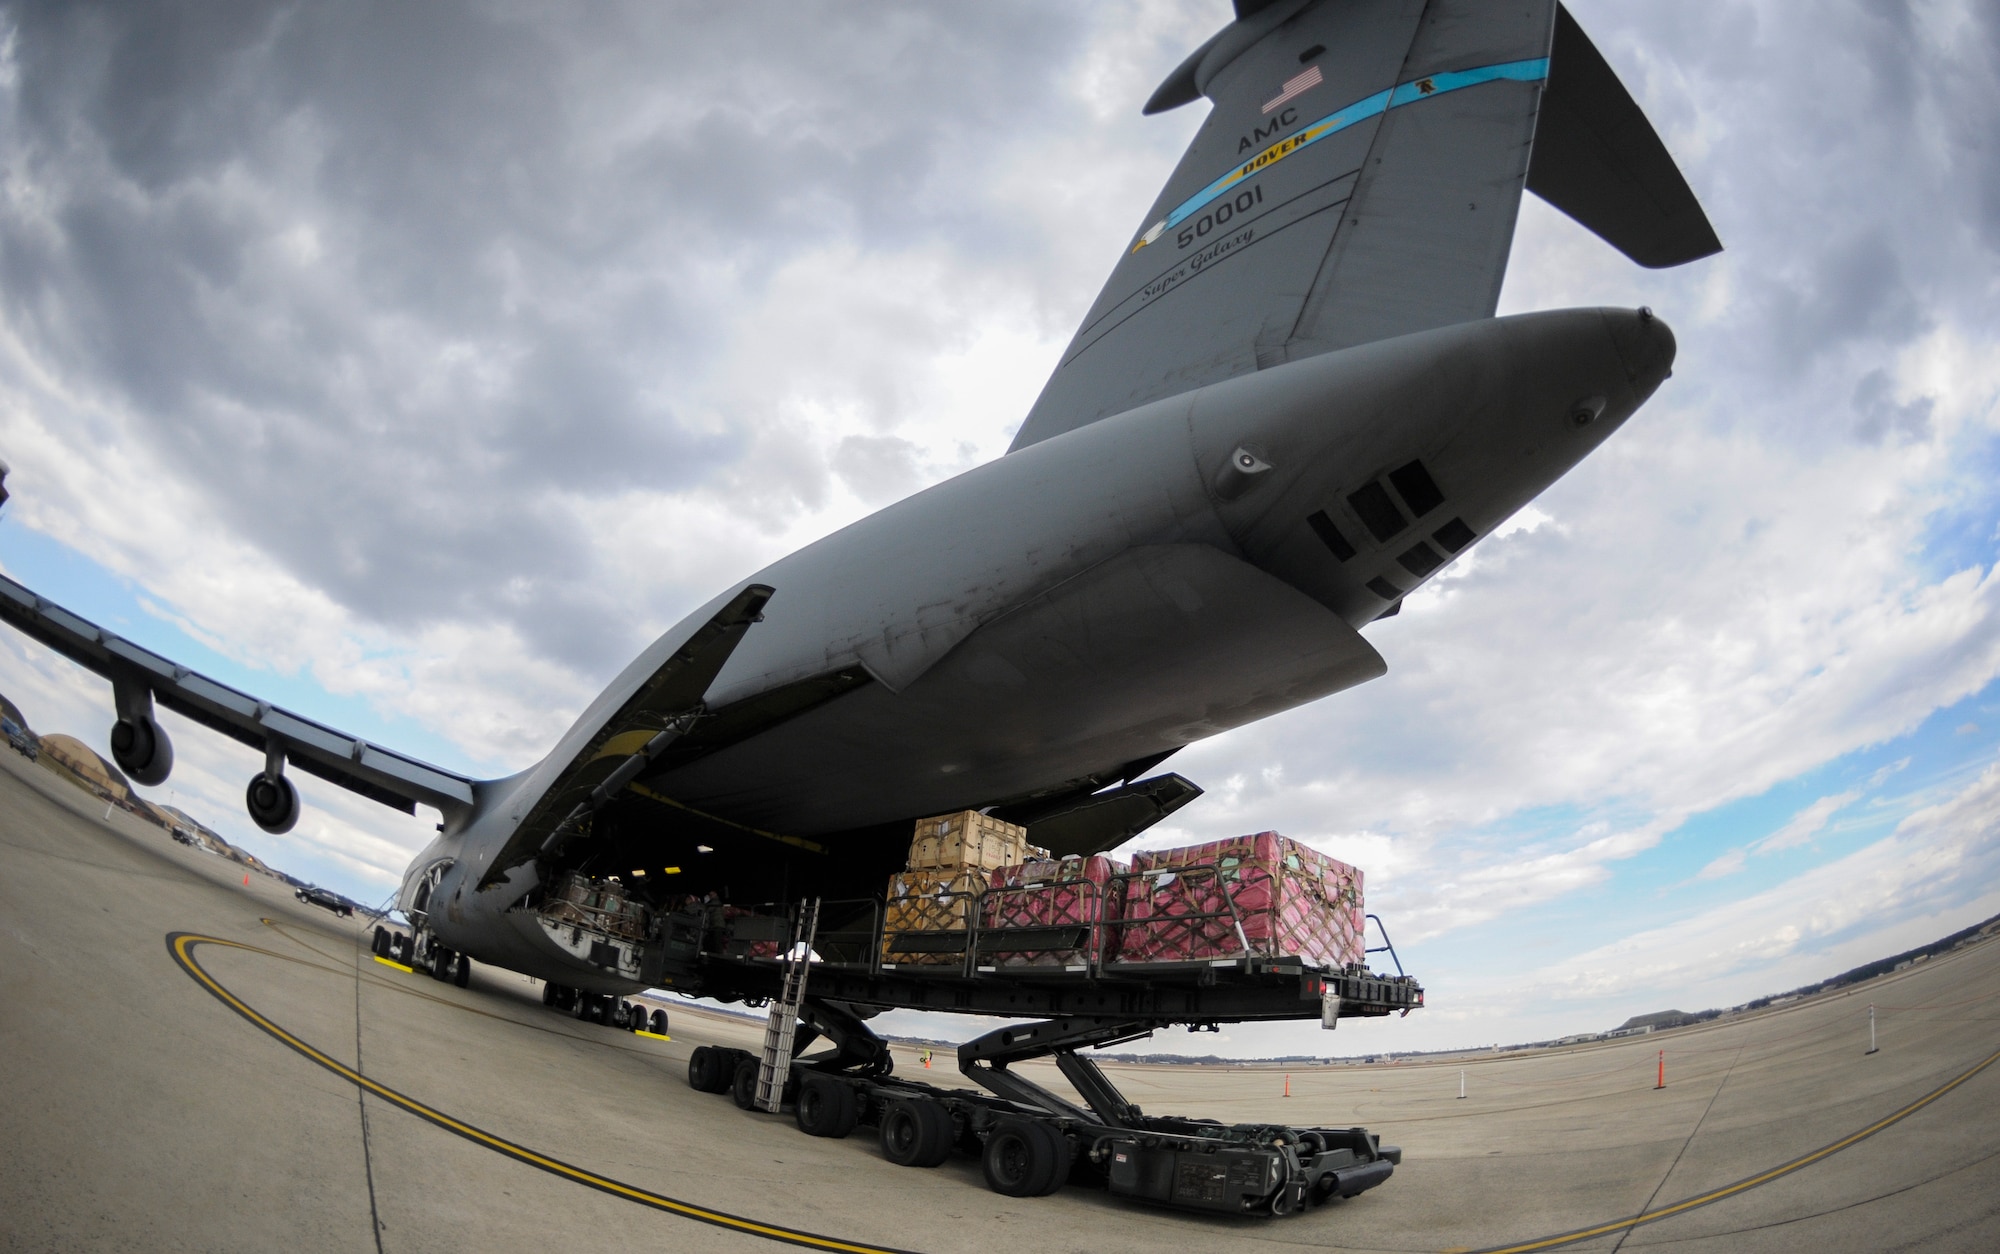 Presidential materials are loaded onto a C-5 Galaxy cargo aircraft at Joint Base Andrews, Md., Feb. 15, 2017. The Joint Records Team (JRT) made up of Airmen assigned to the Air Force District of Washington (AFDW) and Soldiers from the U.S. Army's 3rd Infantry Division "The Old Guard" worked in concert with Presidential Material Handlers from the National Archives and Records Management (NARA) over several months to ensure the safe movement of the records and artifacts gathered during the eight years of President Obama's administration. The JRT was tasked with helping to inventory, prepare for shipping, palletize and load several tons of paper records, terabytes of electronic records, and thousands of artifacts. Along with several truck shipments the bulk of the materials were loaded onto and Air Force C-5 Galaxy cargo aircraft brought in from Dover Air Force Base, Del., and were then flown to Chicago, Ill., where they were placed in secure storage until completion of Obama's Presidential Library. The library is part of the presidential library system, which is administered by the National Archives and Records Administration. (U.S. Air Force photo/Jim Varhegyi) (released) 